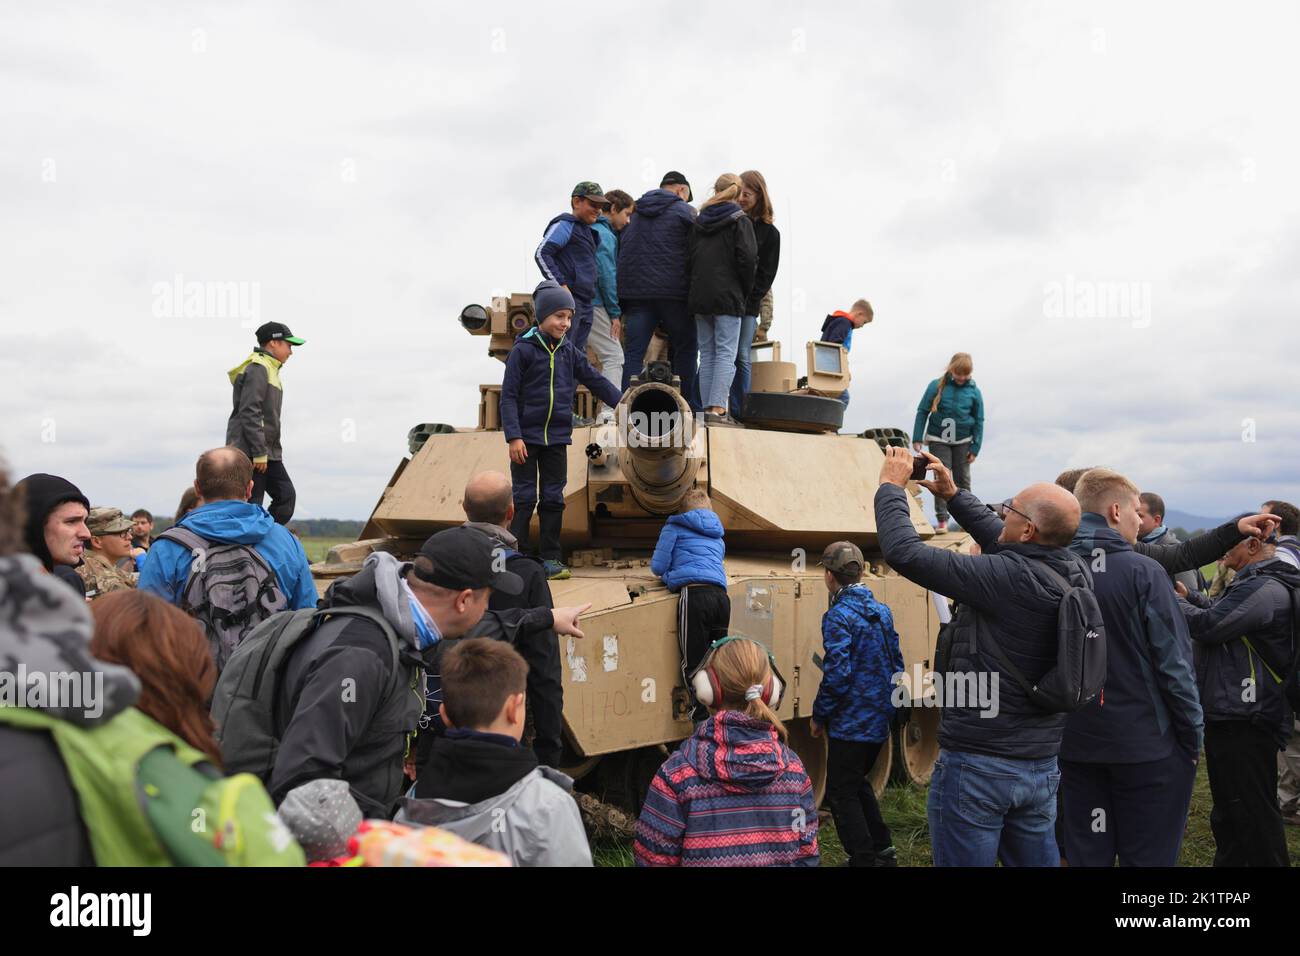 Mosnov, Czech Republic, Czechia - September 17, 2022: Children, kids and civilian people on military show and display. Crowd on the tank from US army. Stock Photo